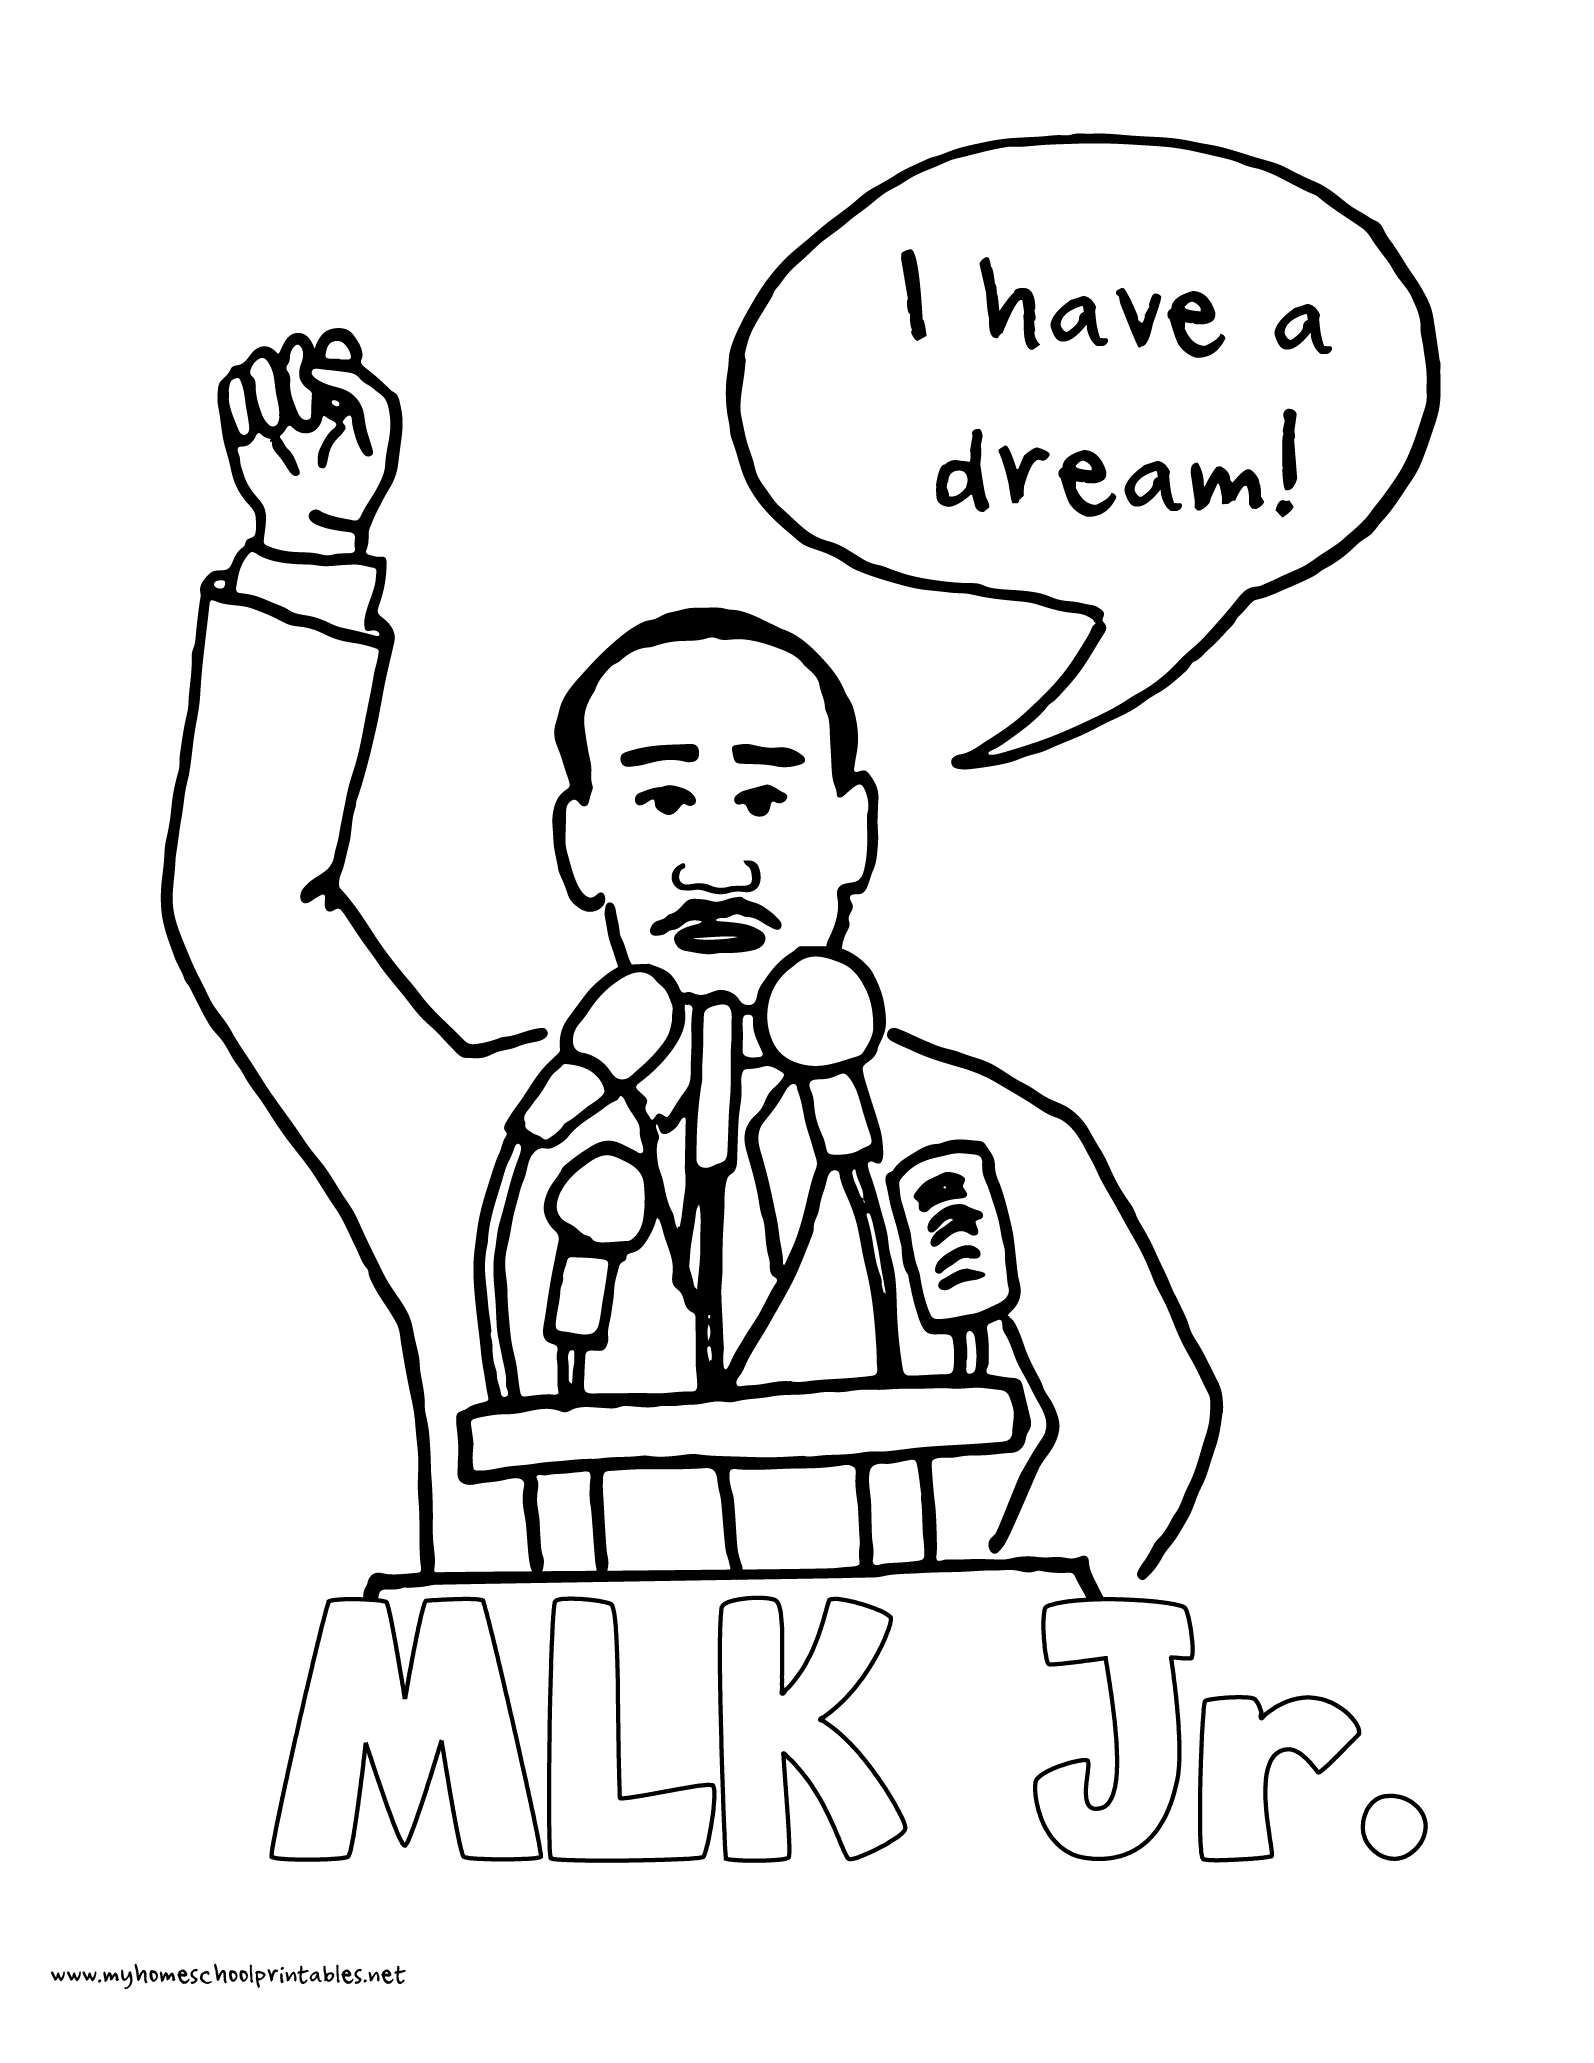 Martin Luther King Coloring Pages Printable At Getcolorings.com | Free